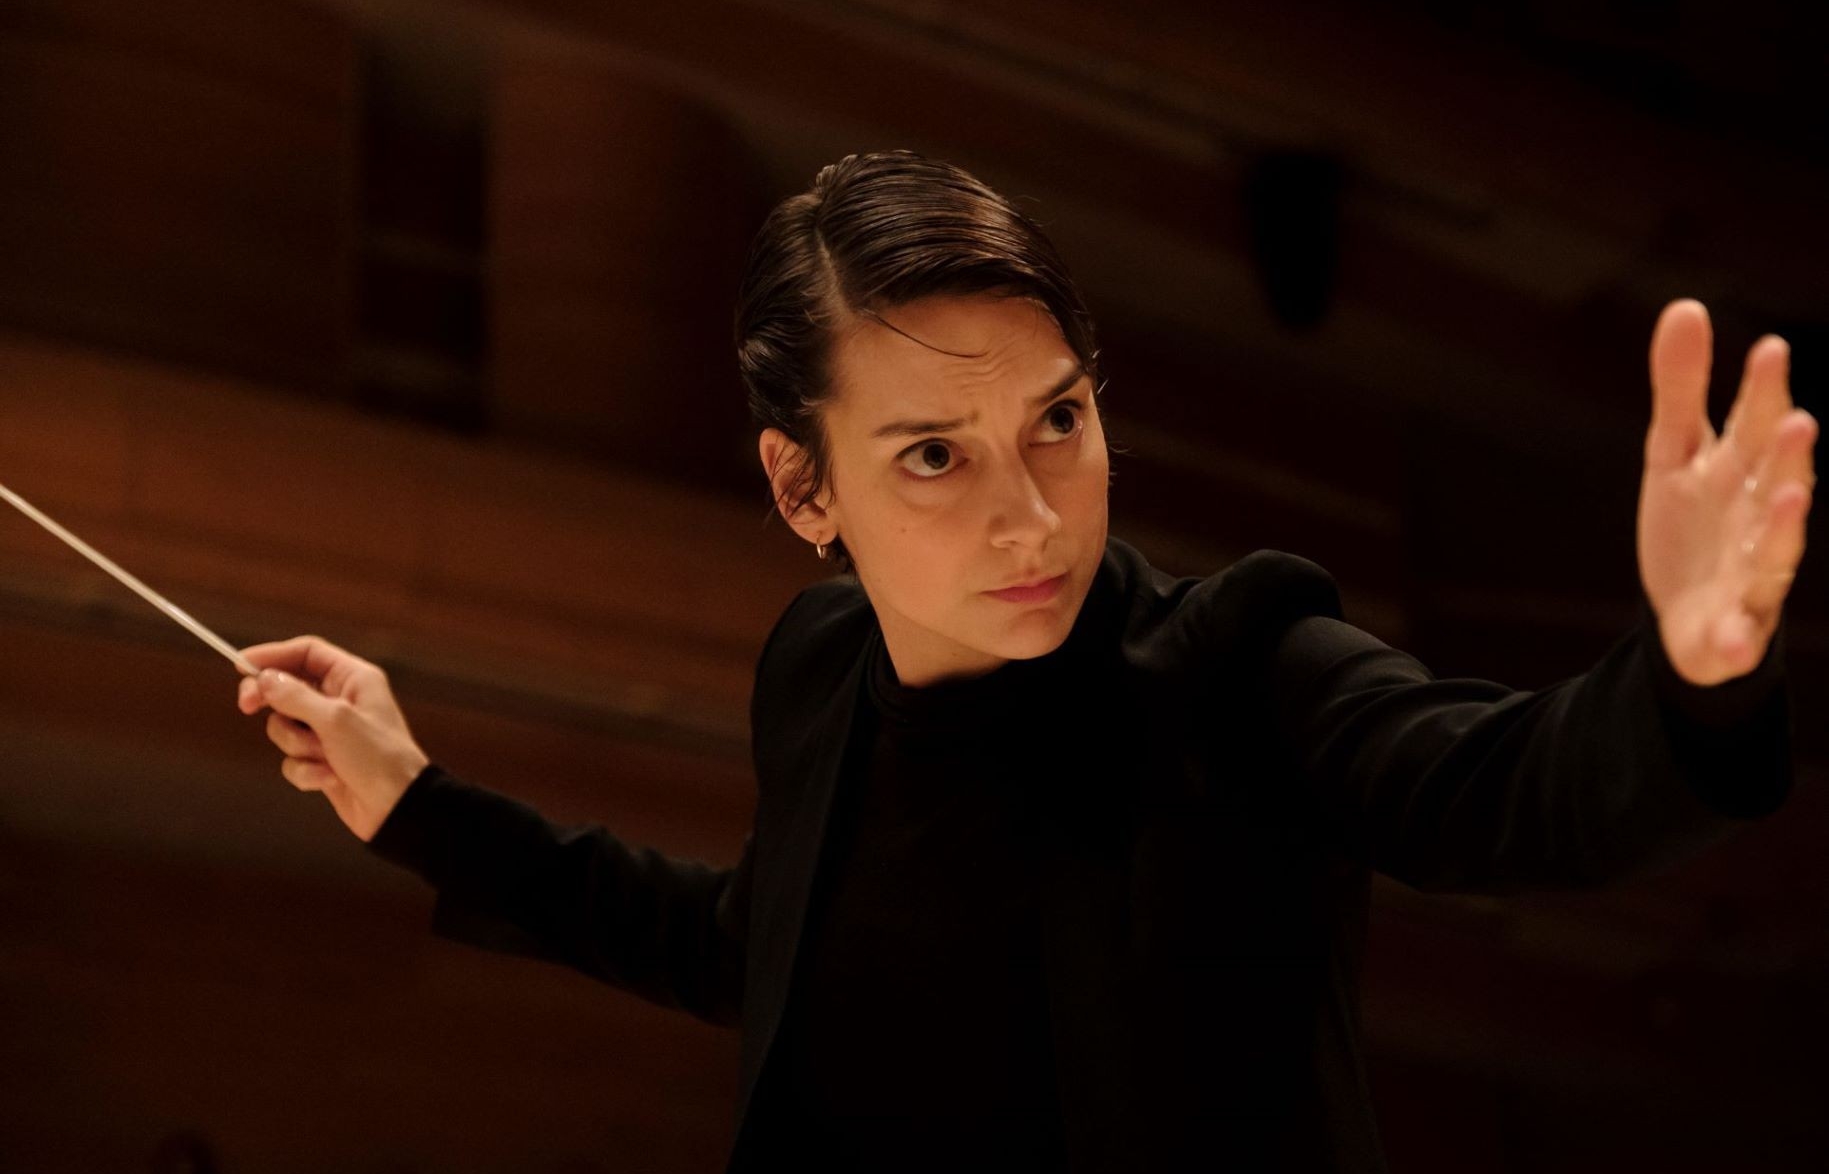 This image features a focused woman with short dark hair, conducting an orchestra. She is wearing a black outfit, with the sleeves slightly rolled up to the forearm, and she is holding a conductor's baton in her right hand. Her intense gaze and outstretched left hand suggest she is deeply engaged in directing the performance, capturing a moment of artistic expression and leadership.